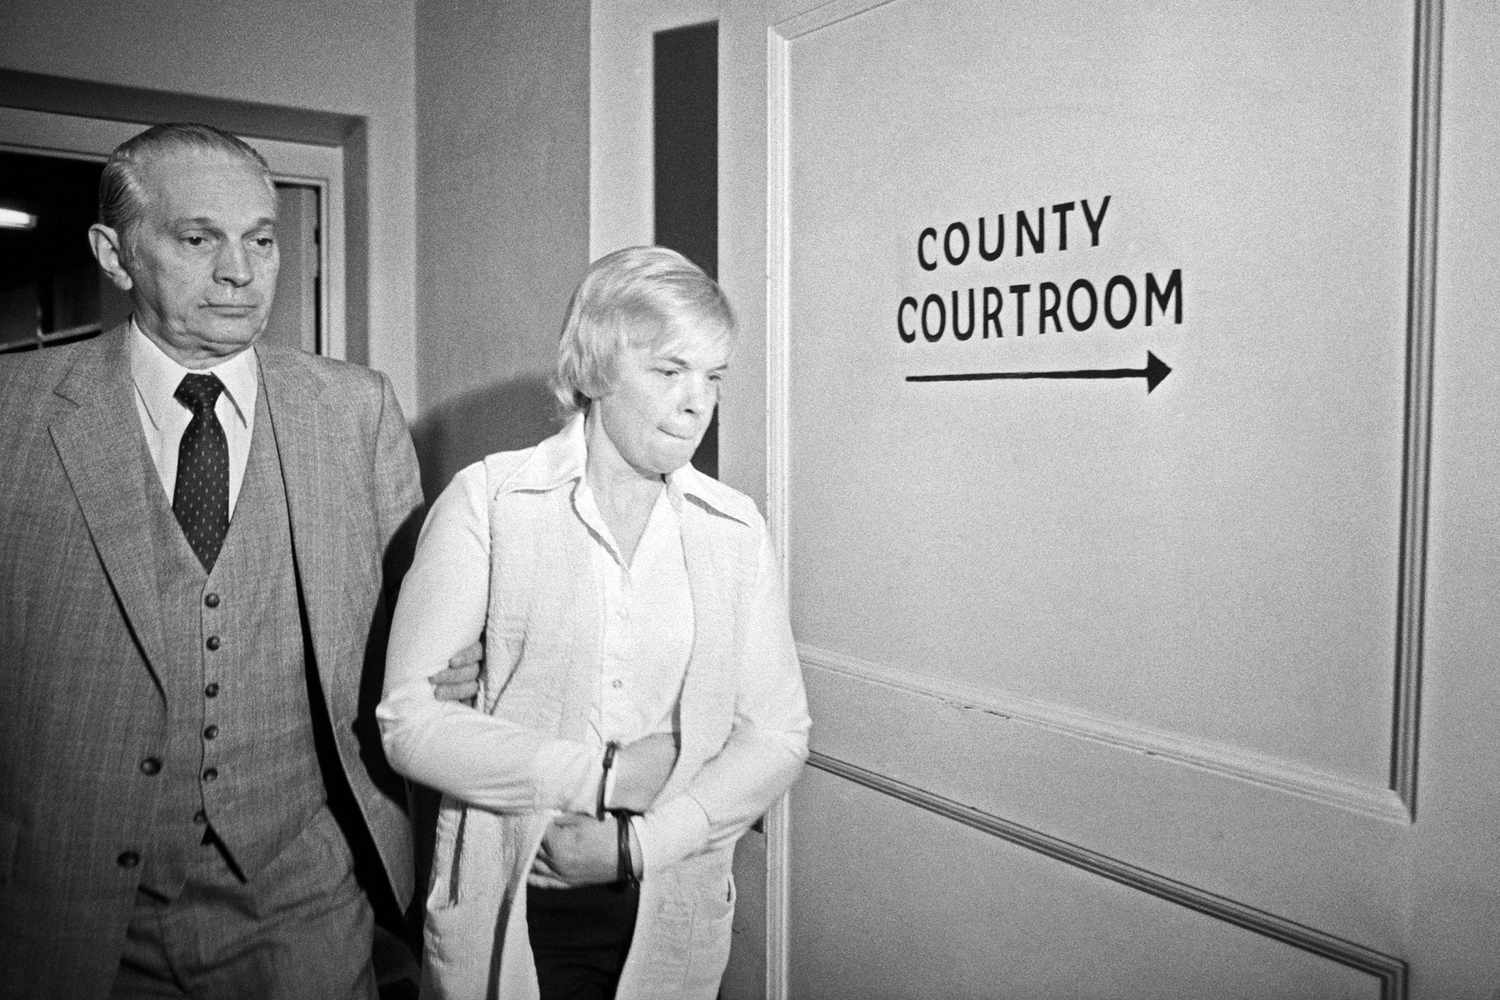 Marybeth Tinning 'Laying Low' After Parole | PEOPLE.com